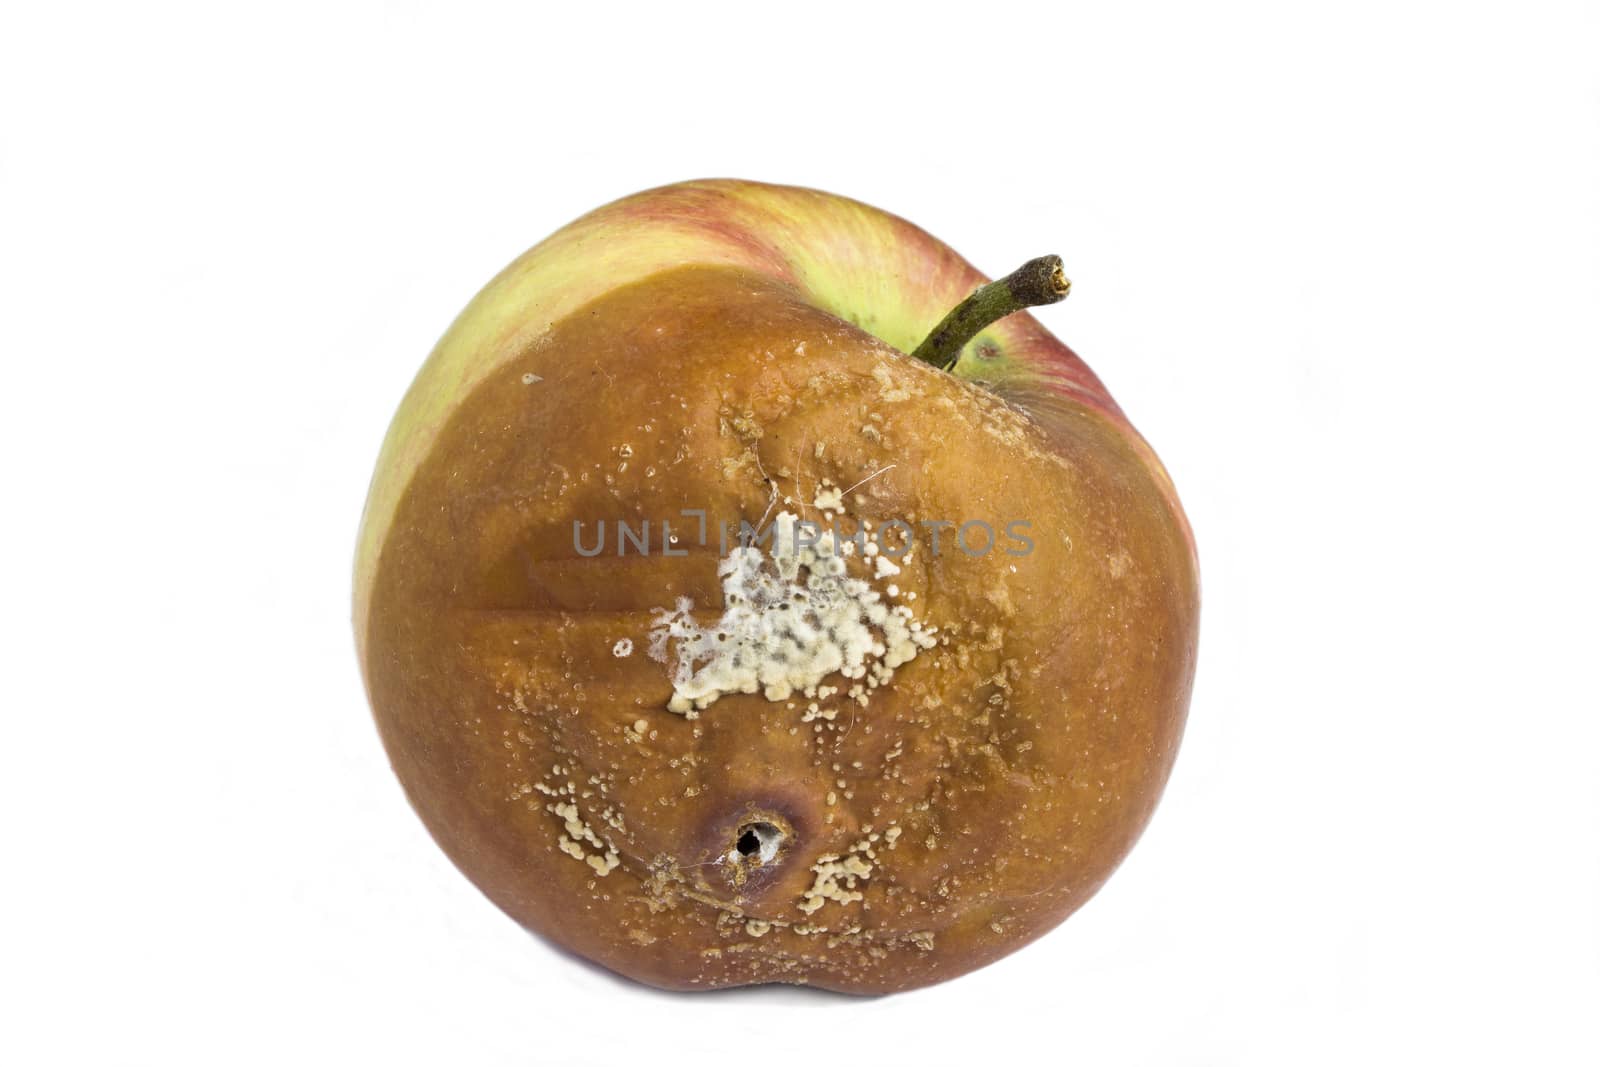 Rotten apple on a white background